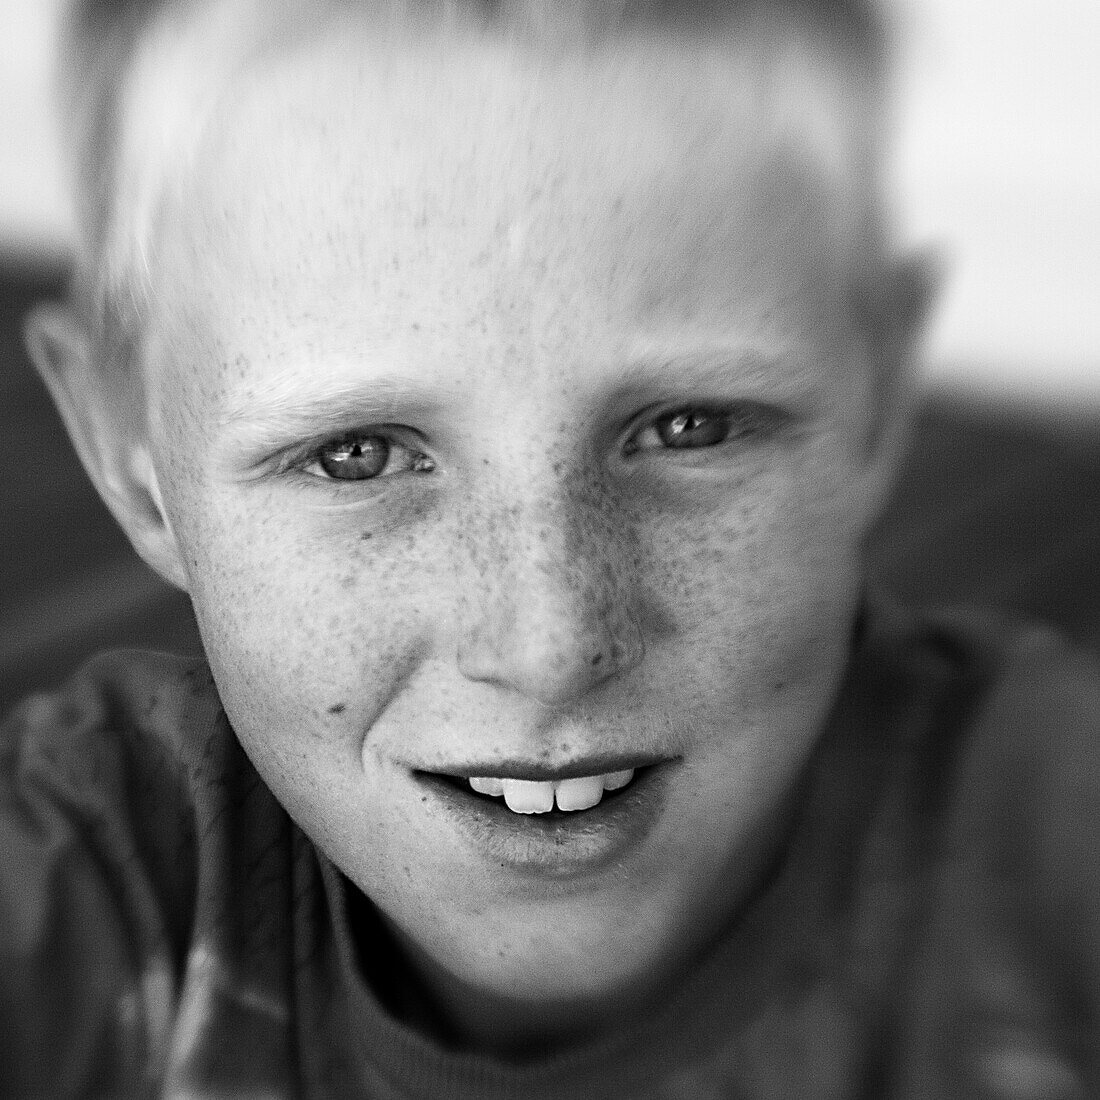 Boy with freckled face looking into the camera (black and white photo using Lensbaby technique), Borden, Western Australia, Australia